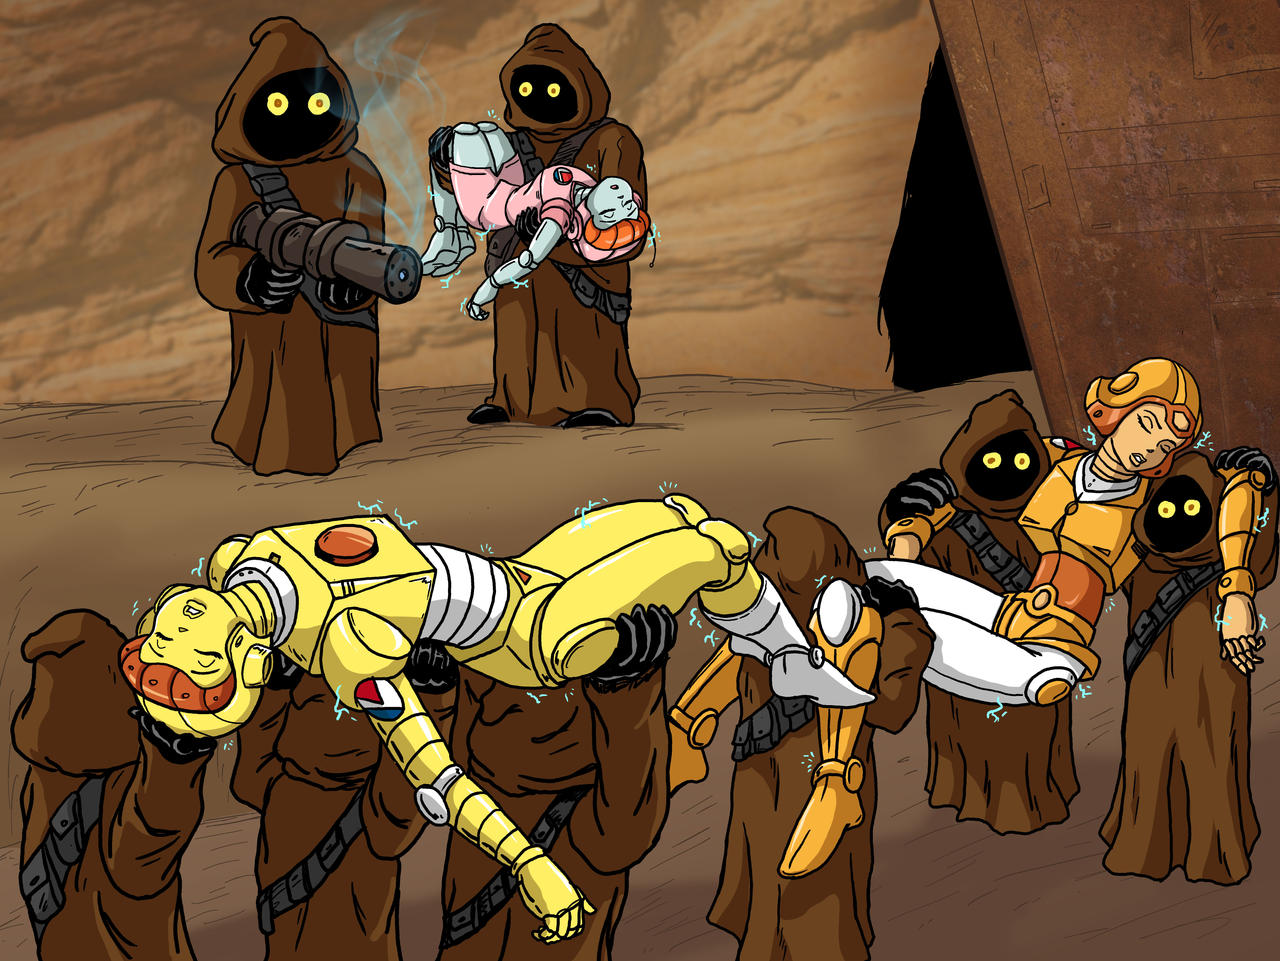 Jawas capture Bo, Boo, and Oh-No from Mighty Orbot